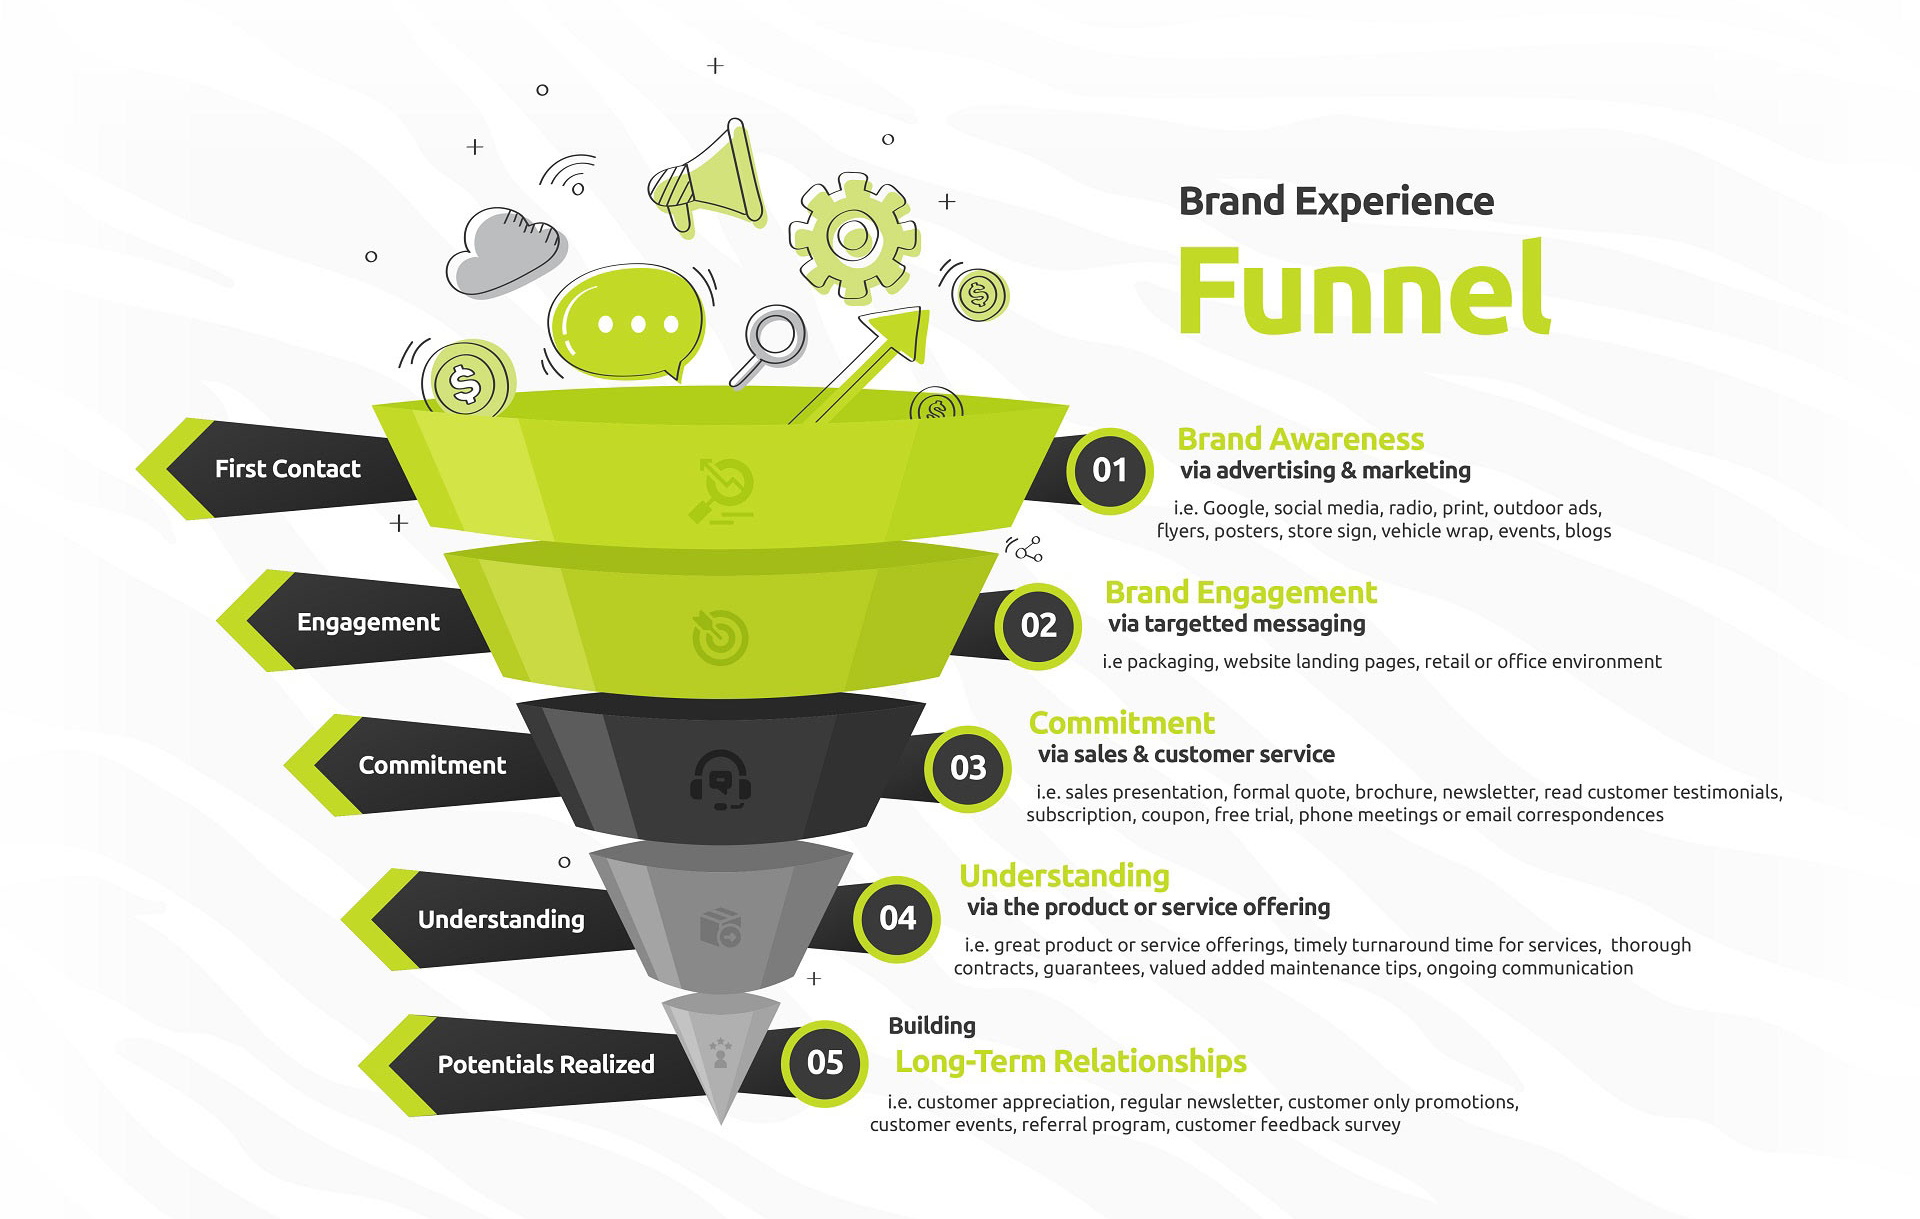 Brand Experience Funnel Details